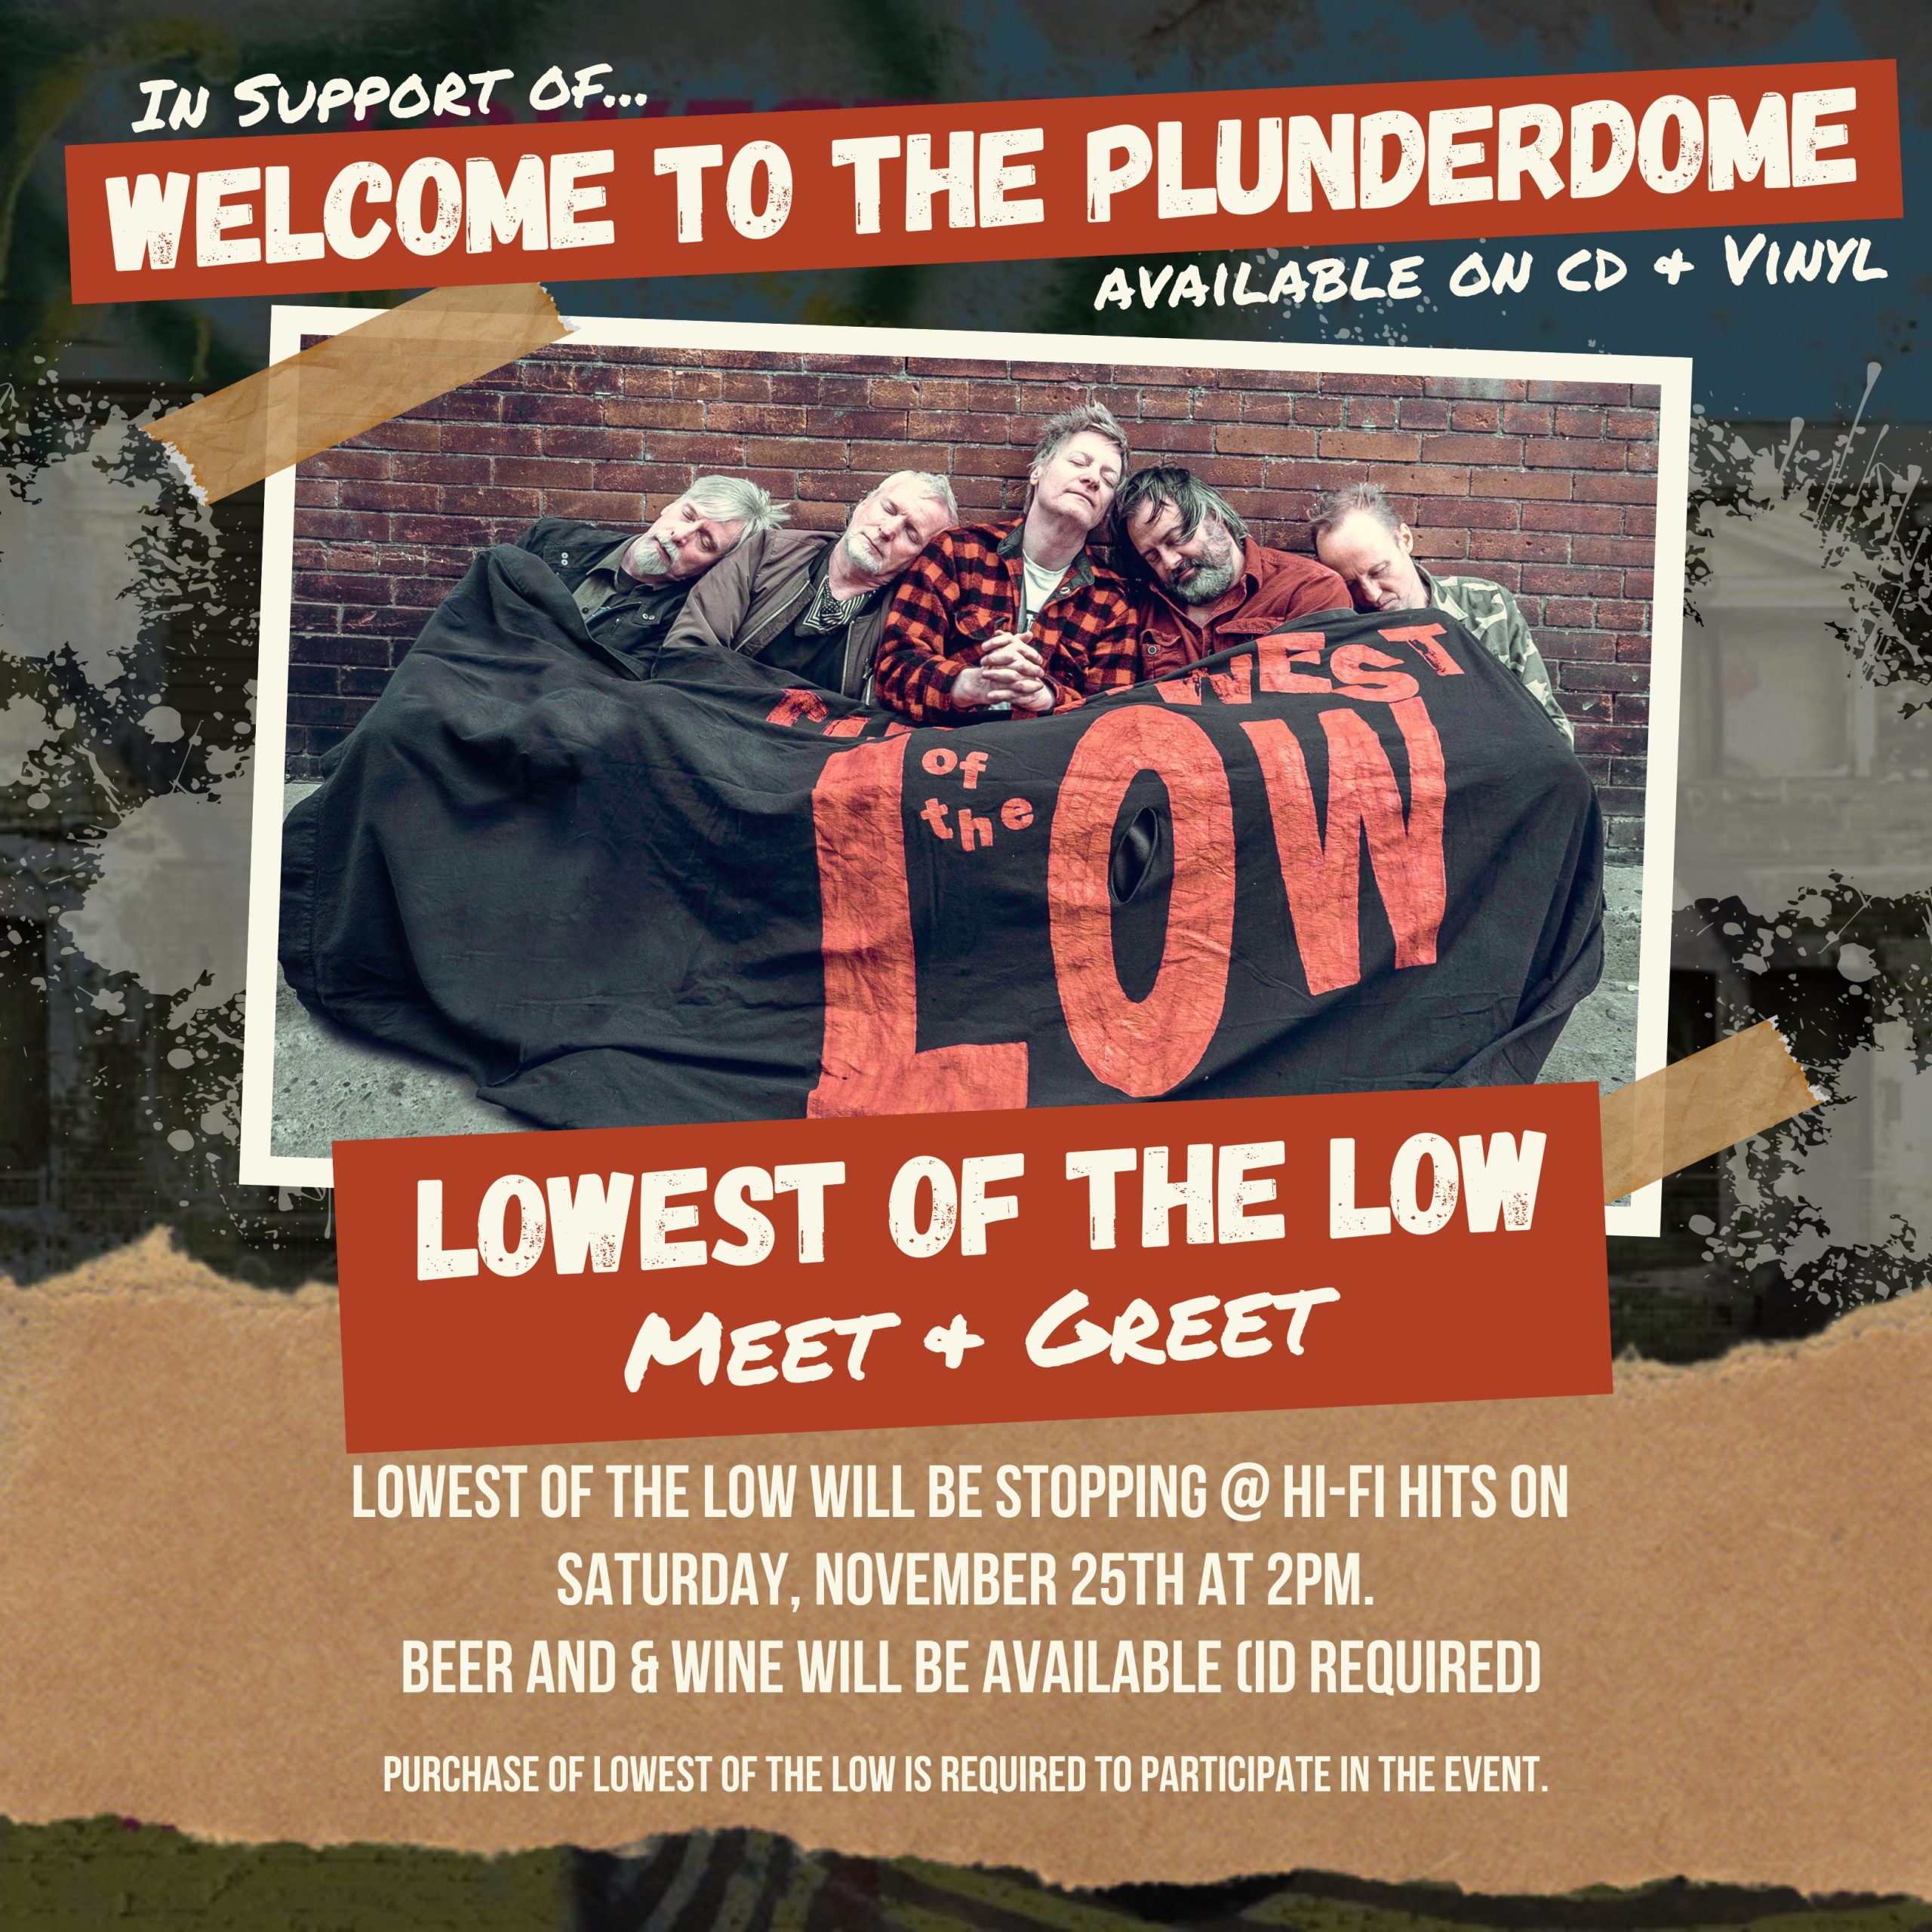 Lowest of the Low: Meet & Greet